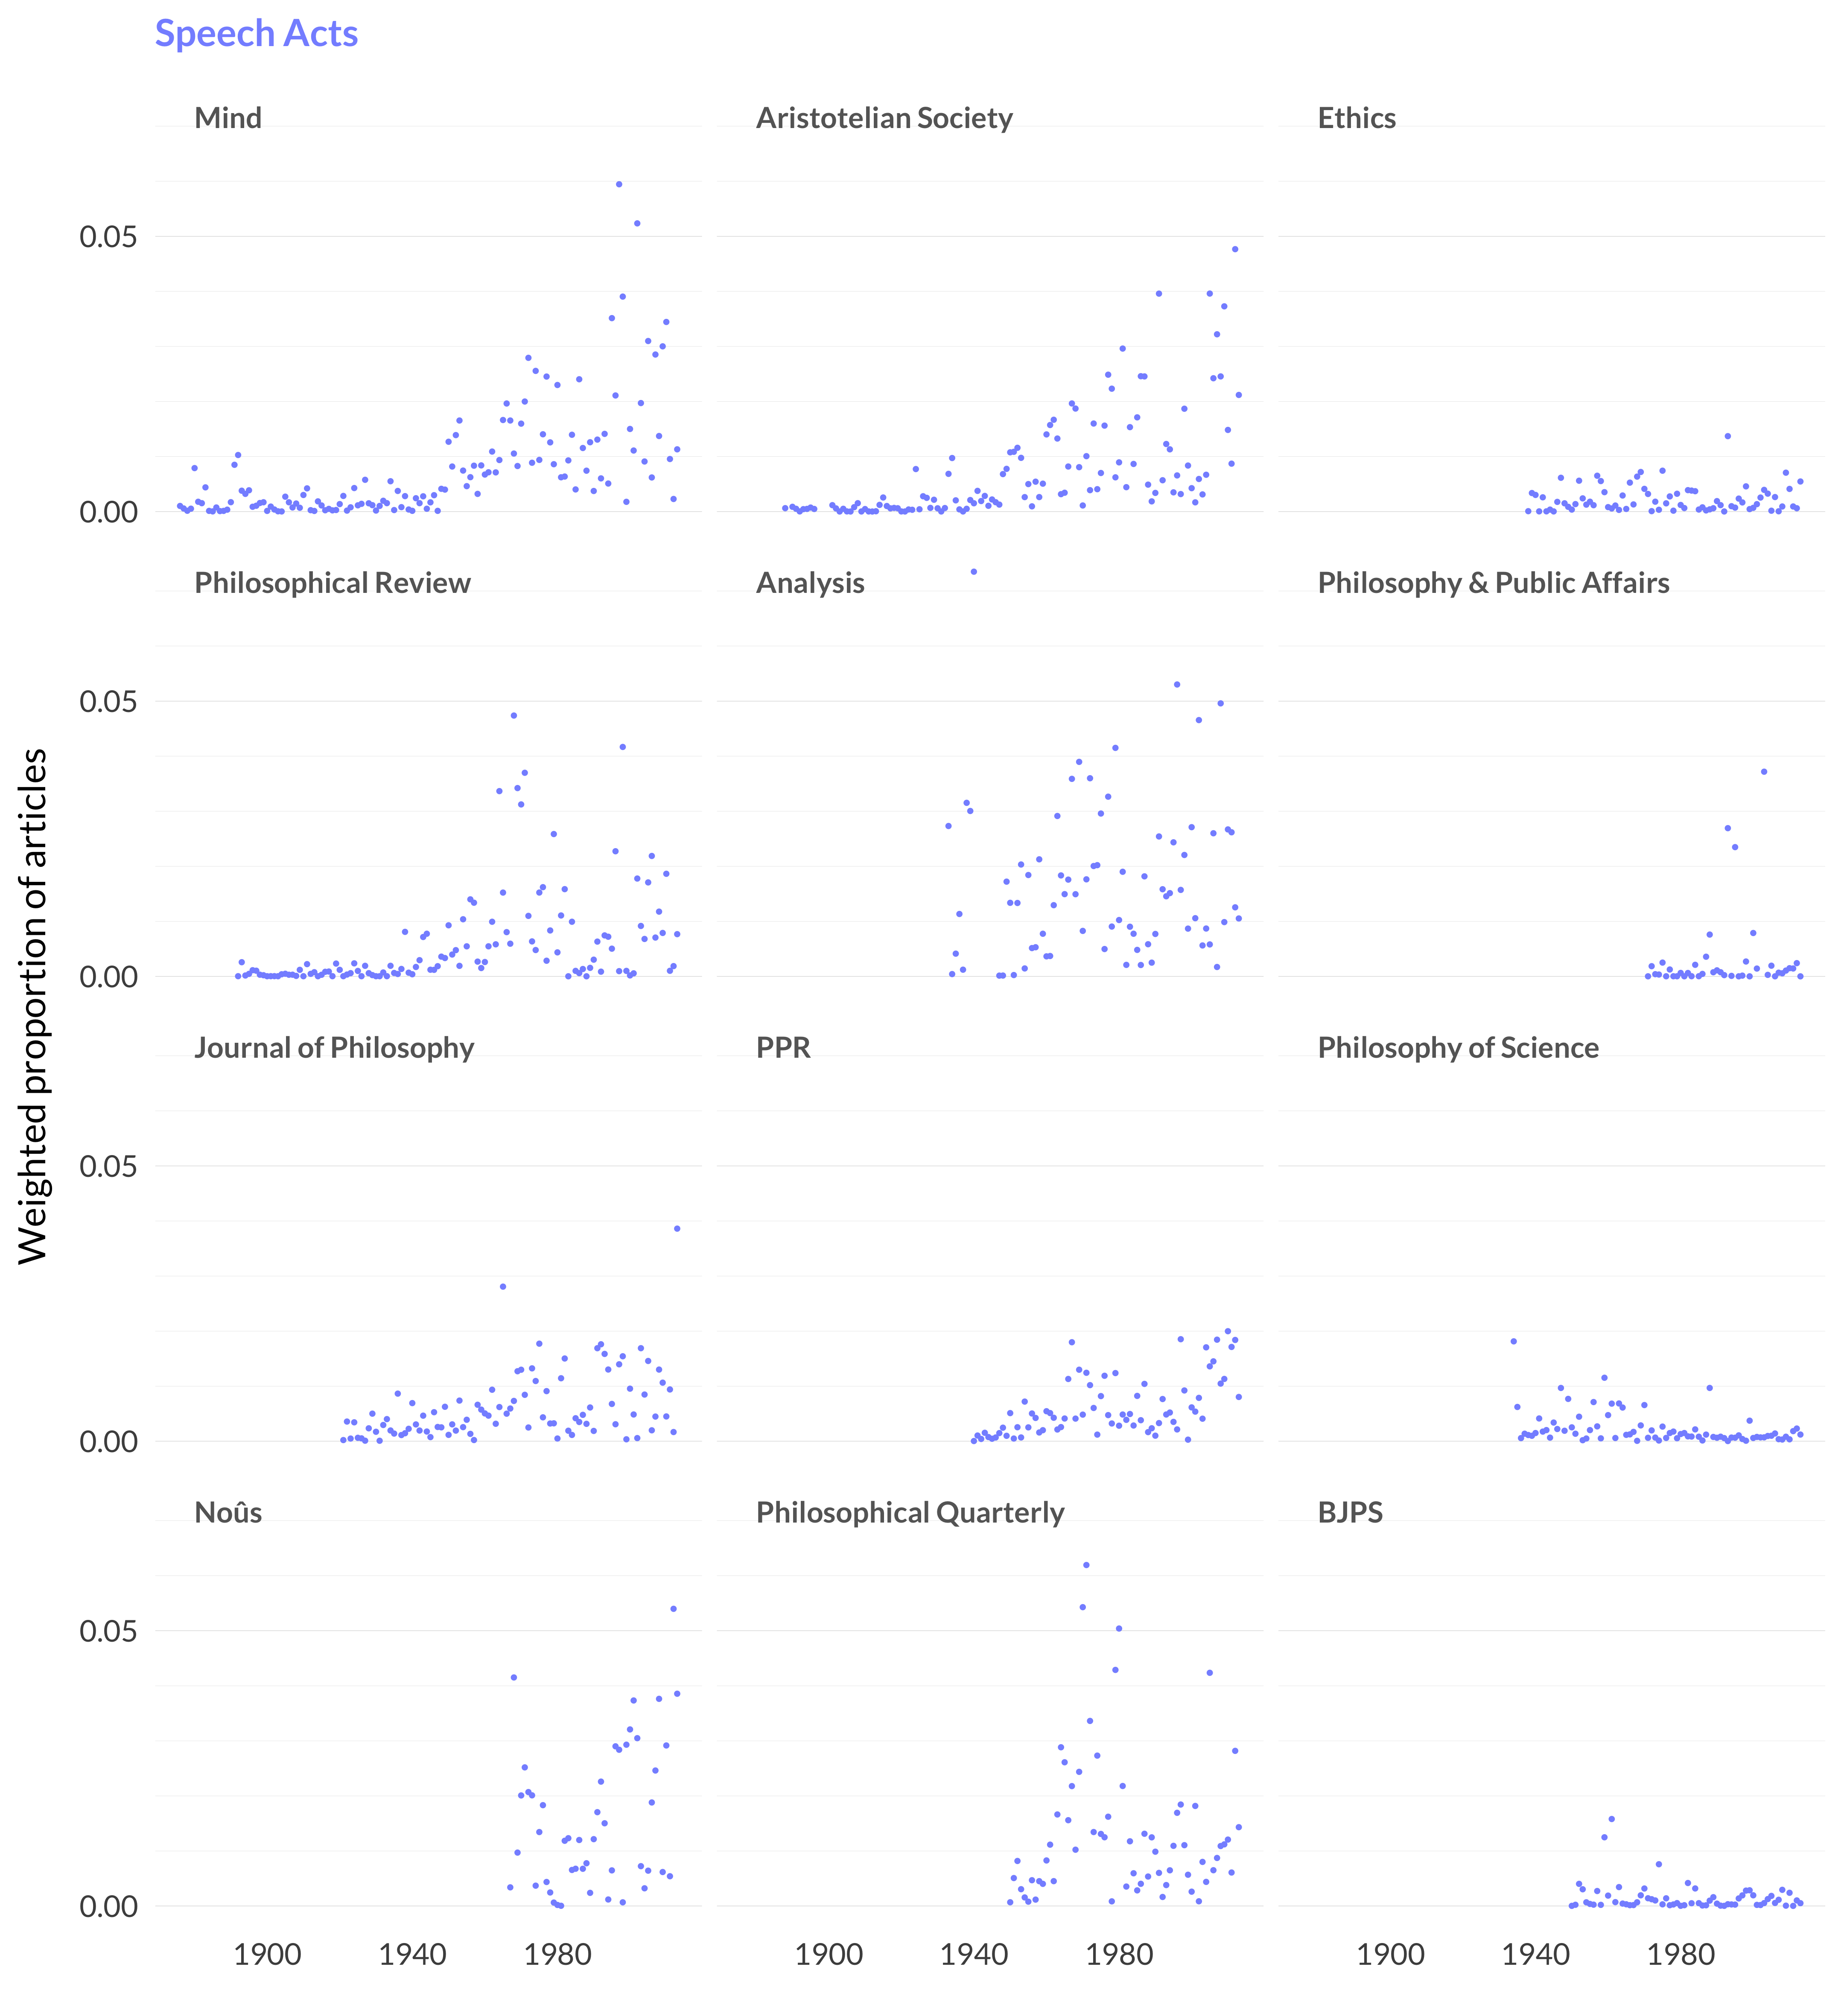 A set of twelve scatterplots showing the proportion of articles in each journal in each year that are in the Speech Actstopic. There is one scatterplot for each of the twelve journals that are the focus of this book. In each scatterplot, the x-axis is the year, and the y-axis is the proportion of articles in that year in that journal in this topic. Here are the average values for each of the twelve scatterplots - these tell you on average how much of the journal is dedicated to this topic. Mind - 0.8%. Proceedings of the Aristotelian Society - 0.8%. Ethics - 0.2%. Philosophical Review - 0.6%. Analysis - 1.7%. Philosophy and Public Affairs - 0.3%. Journal of Philosophy - 0.6%. Philosophy and Phenomenological Research - 0.6%. Philosophy of Science - 0.2%. Noûs - 1.6%. The Philosophical Quarterly - 1.4%. British Journal for the Philosophy of Science - 0.2%. The topic reaches its zenith in year 1971 when it makes up, on average across the journals, 1.6% of the articles. And it hits a minimum in year 1903 when it makes up, on average across the journals, 0.0% of the articles.